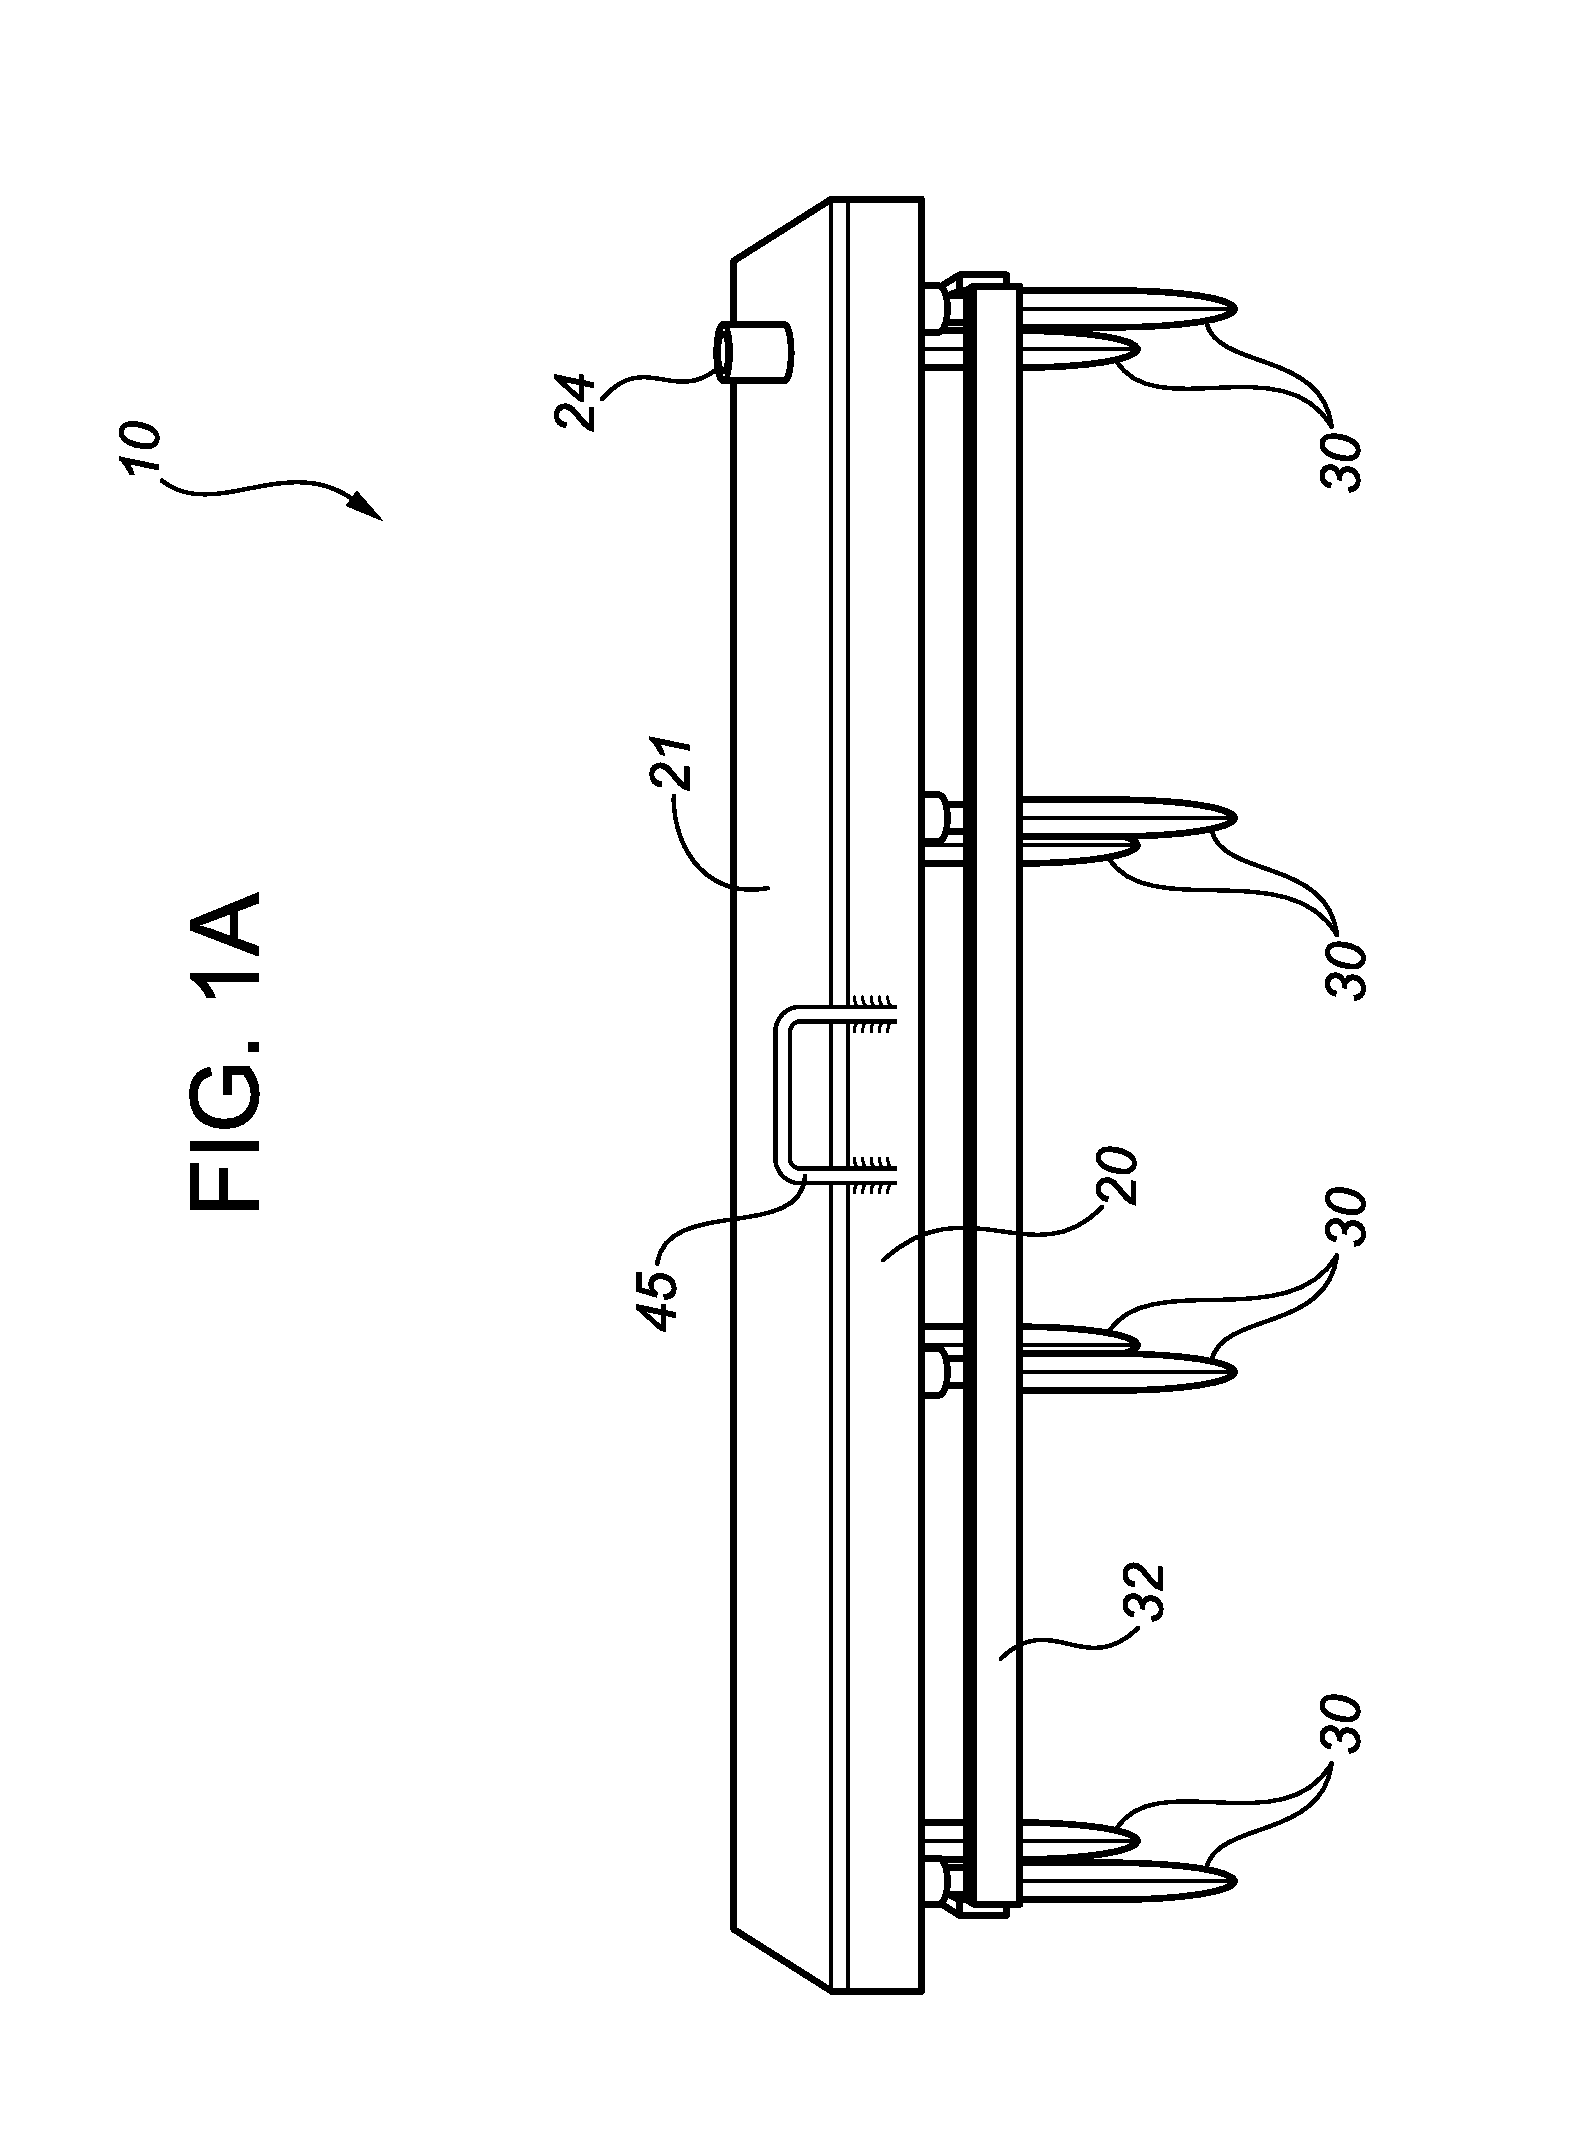 Electrical ground fault protection device